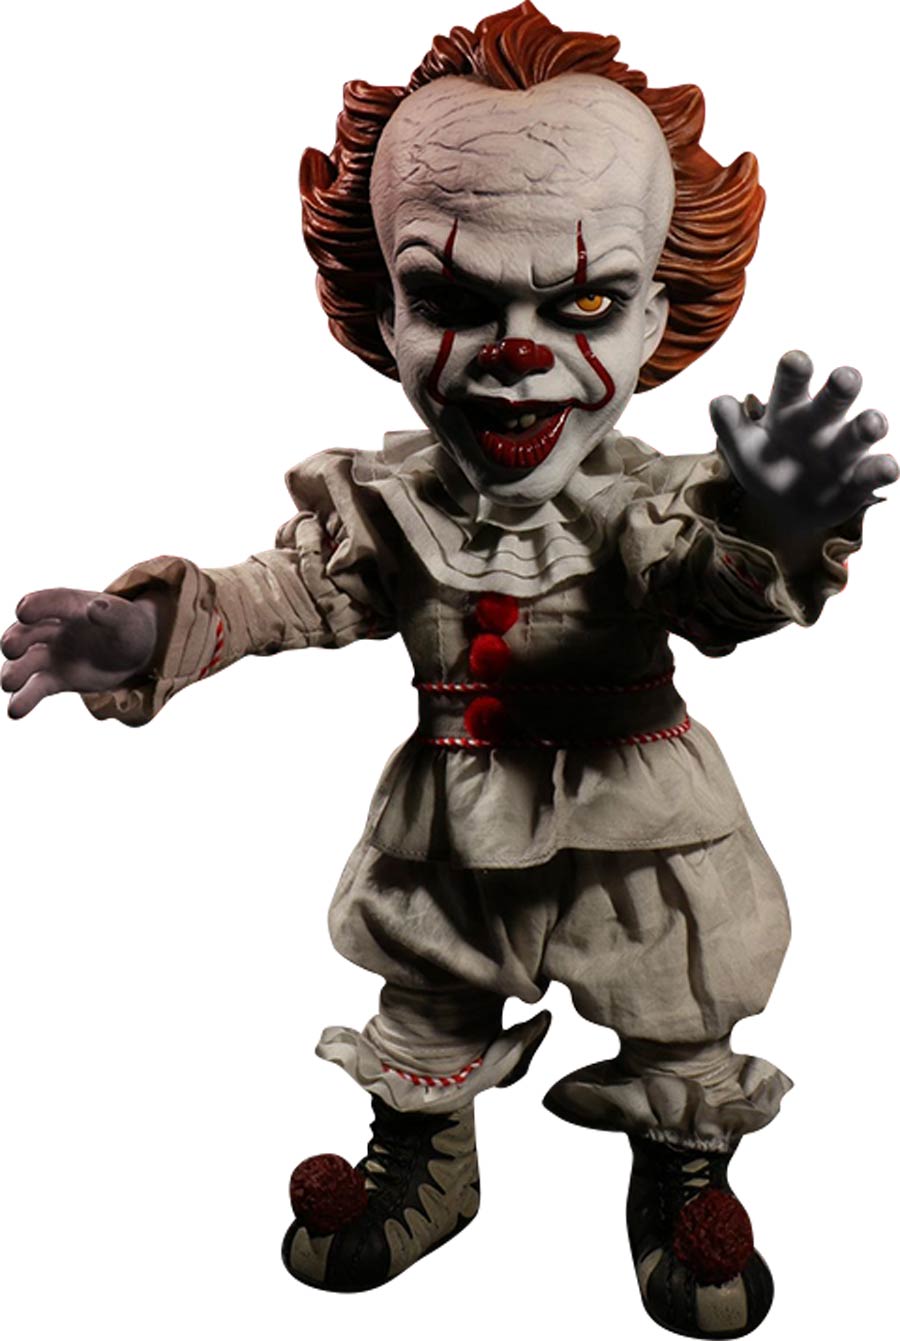 Mega Scale IT (2017) Pennywise Figure With Sound Feature